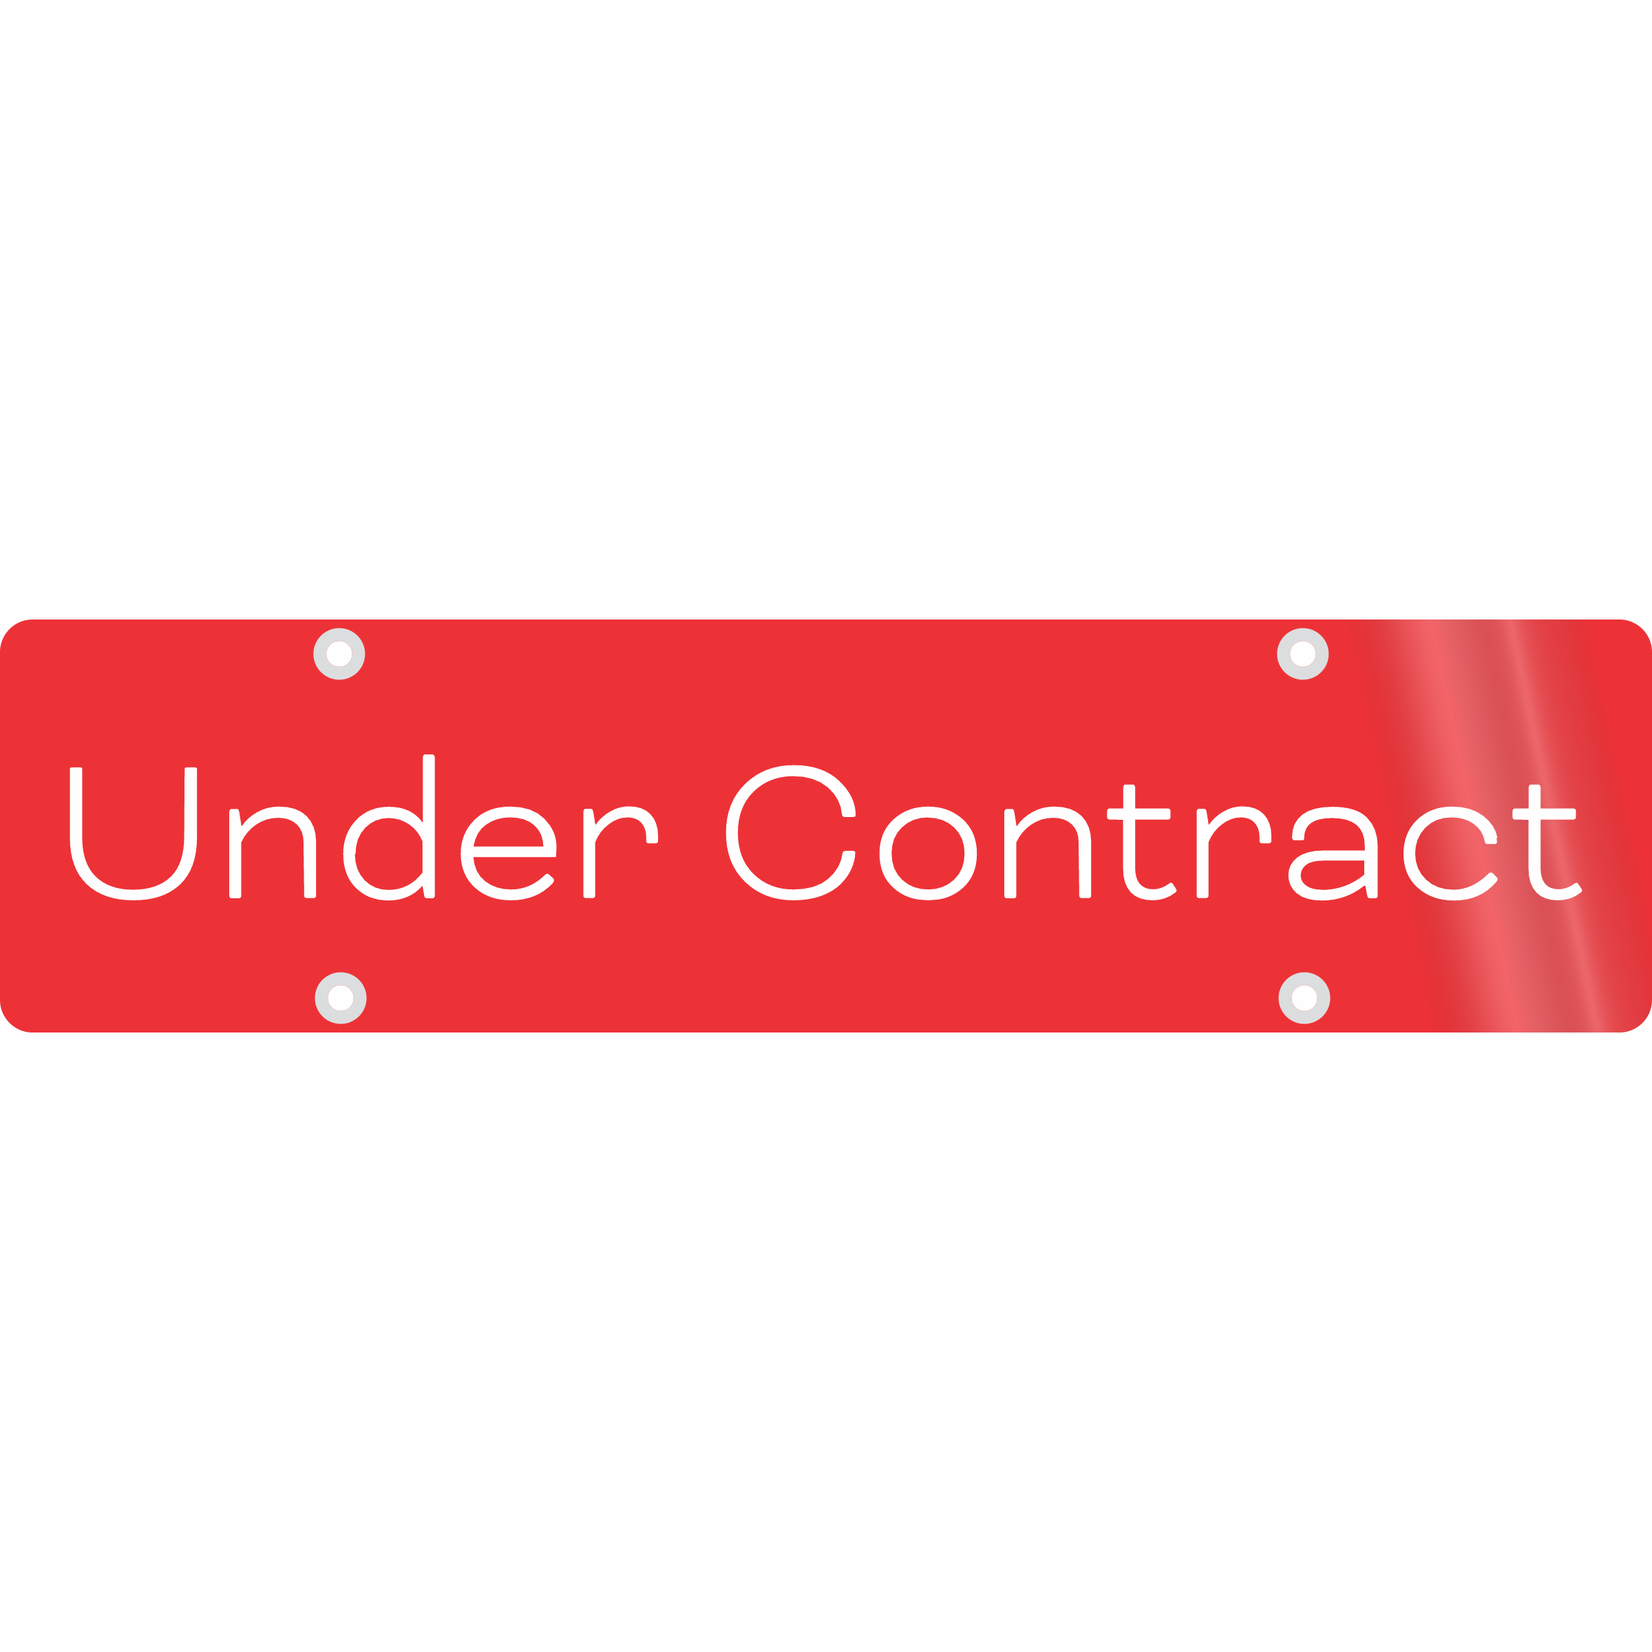 24" x 6" - Under Contract